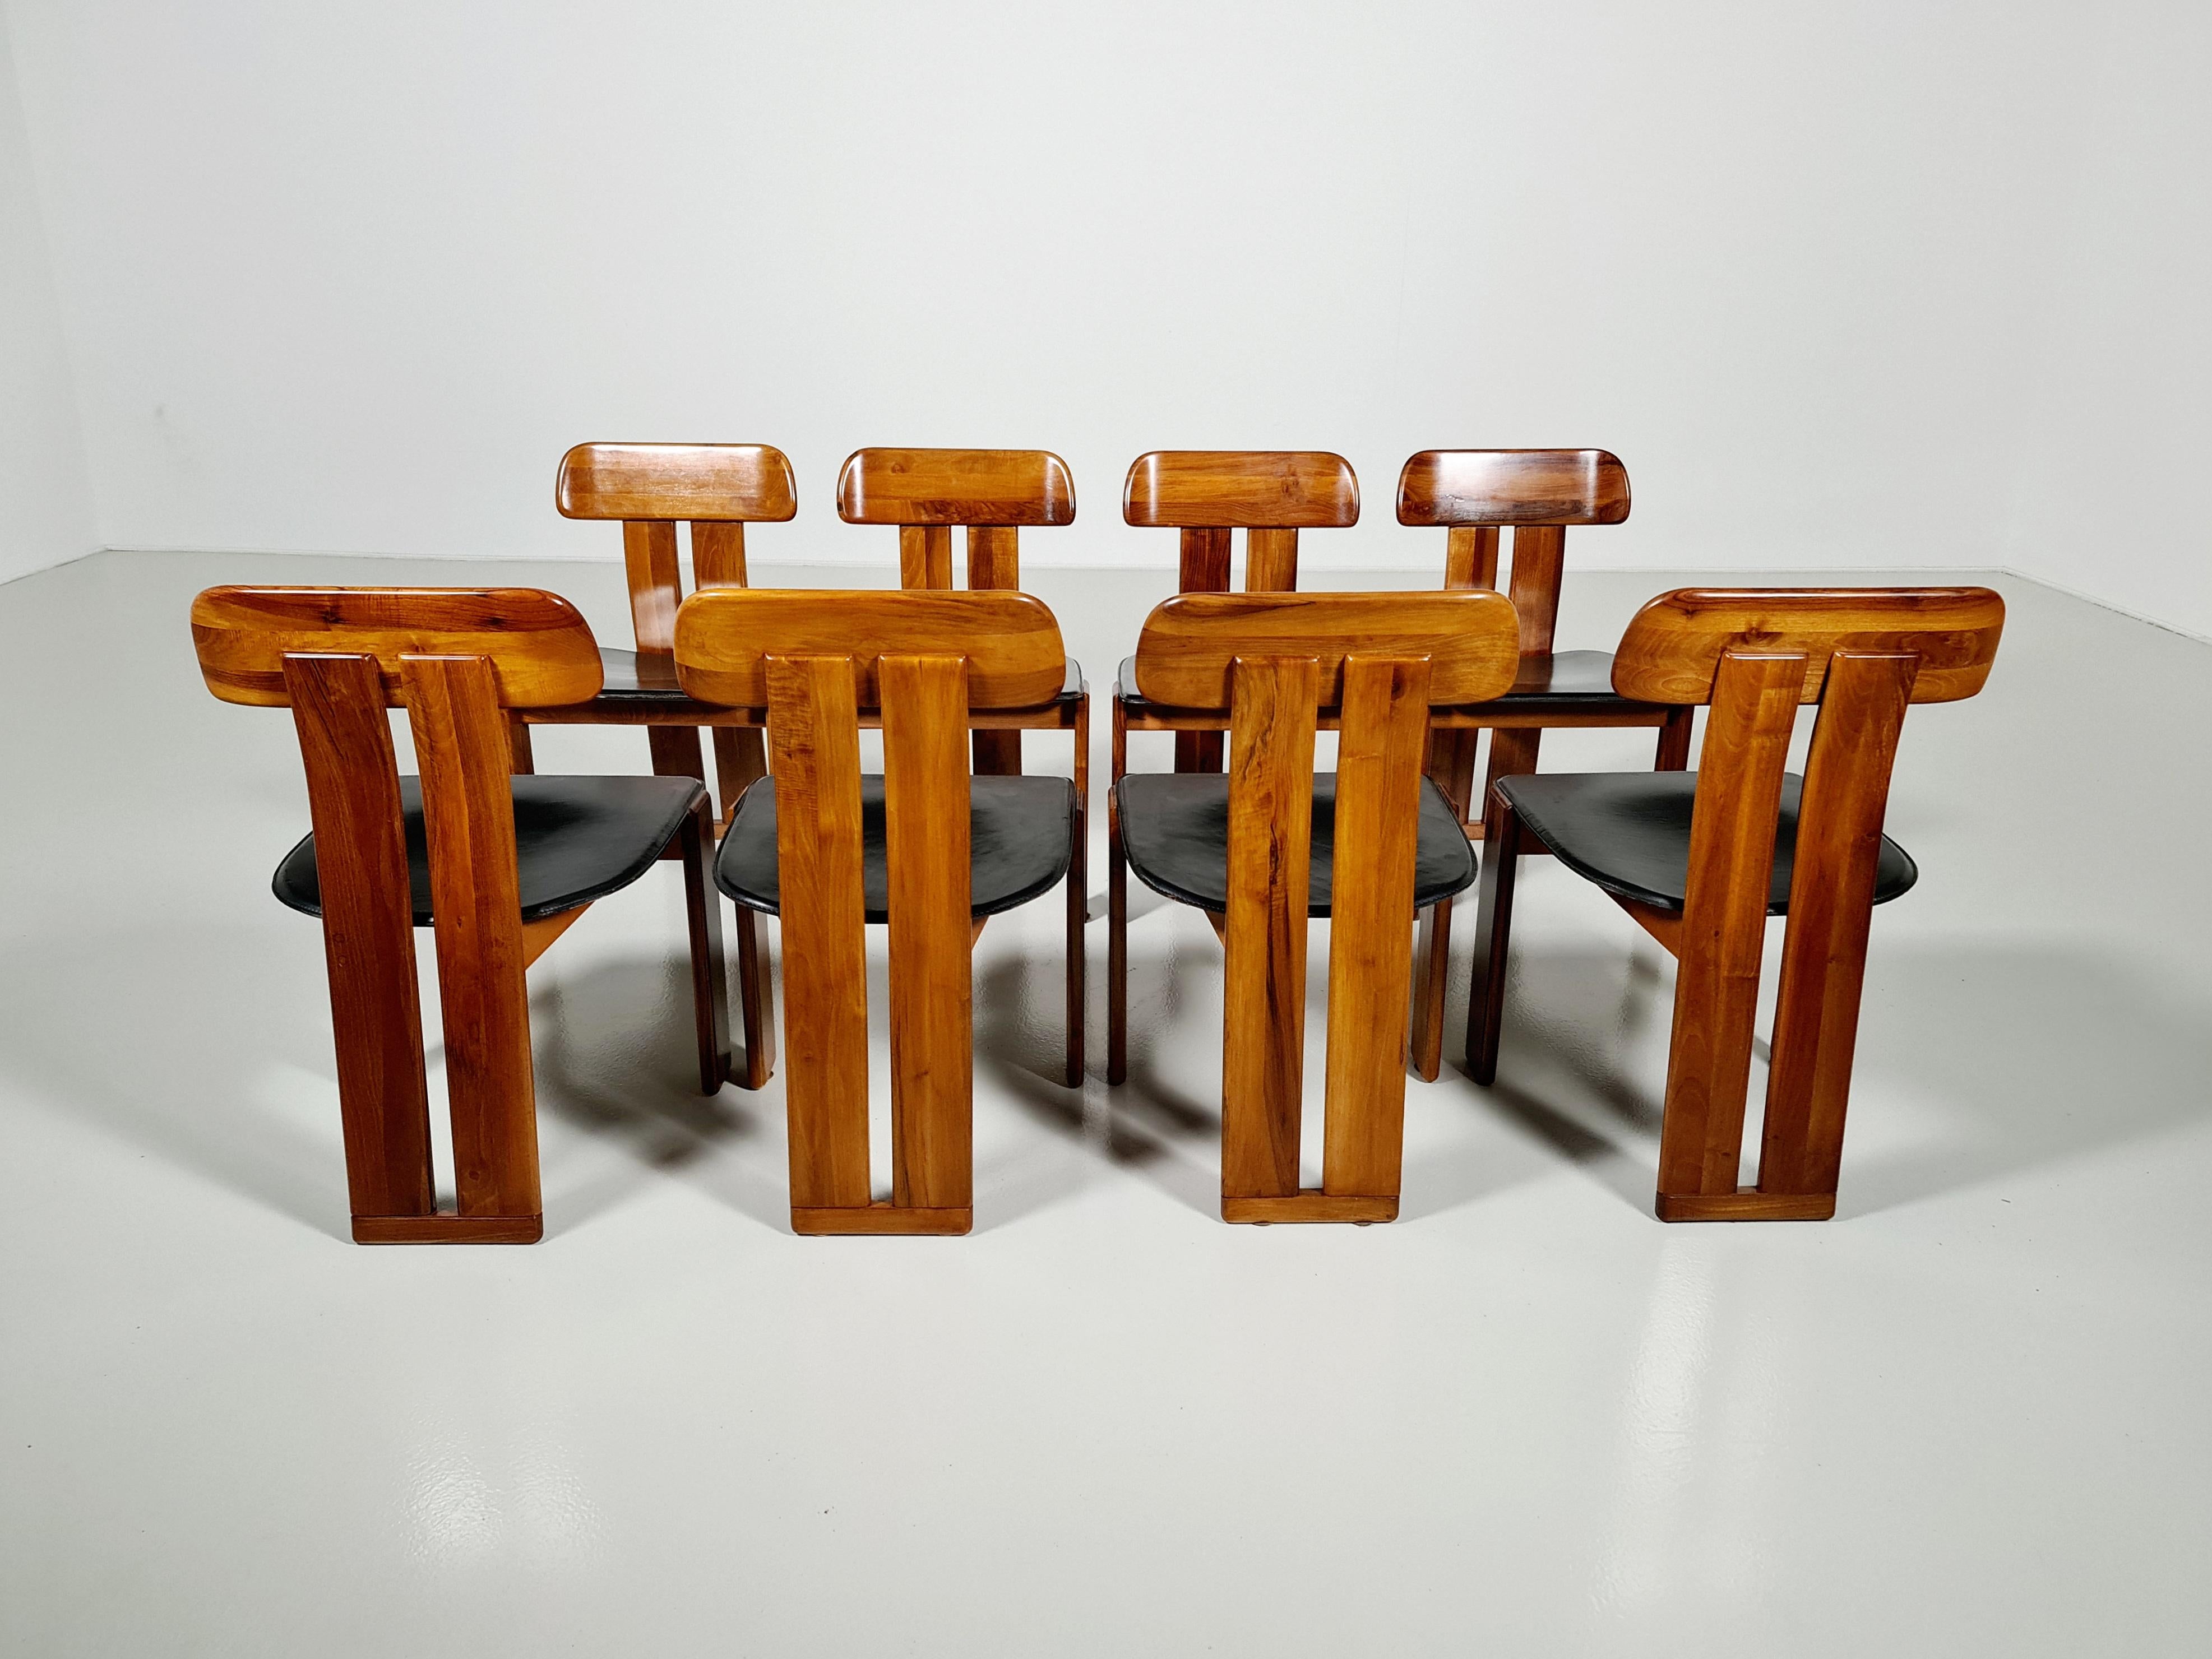 Set of 8 sculptural Italian dining chairs with saddle-stitched leather seats, black colored. Very comfortable even for larger sitters despite the slim profile. The color of the Italian walnut frame is deep and warm which accompanies the patinated